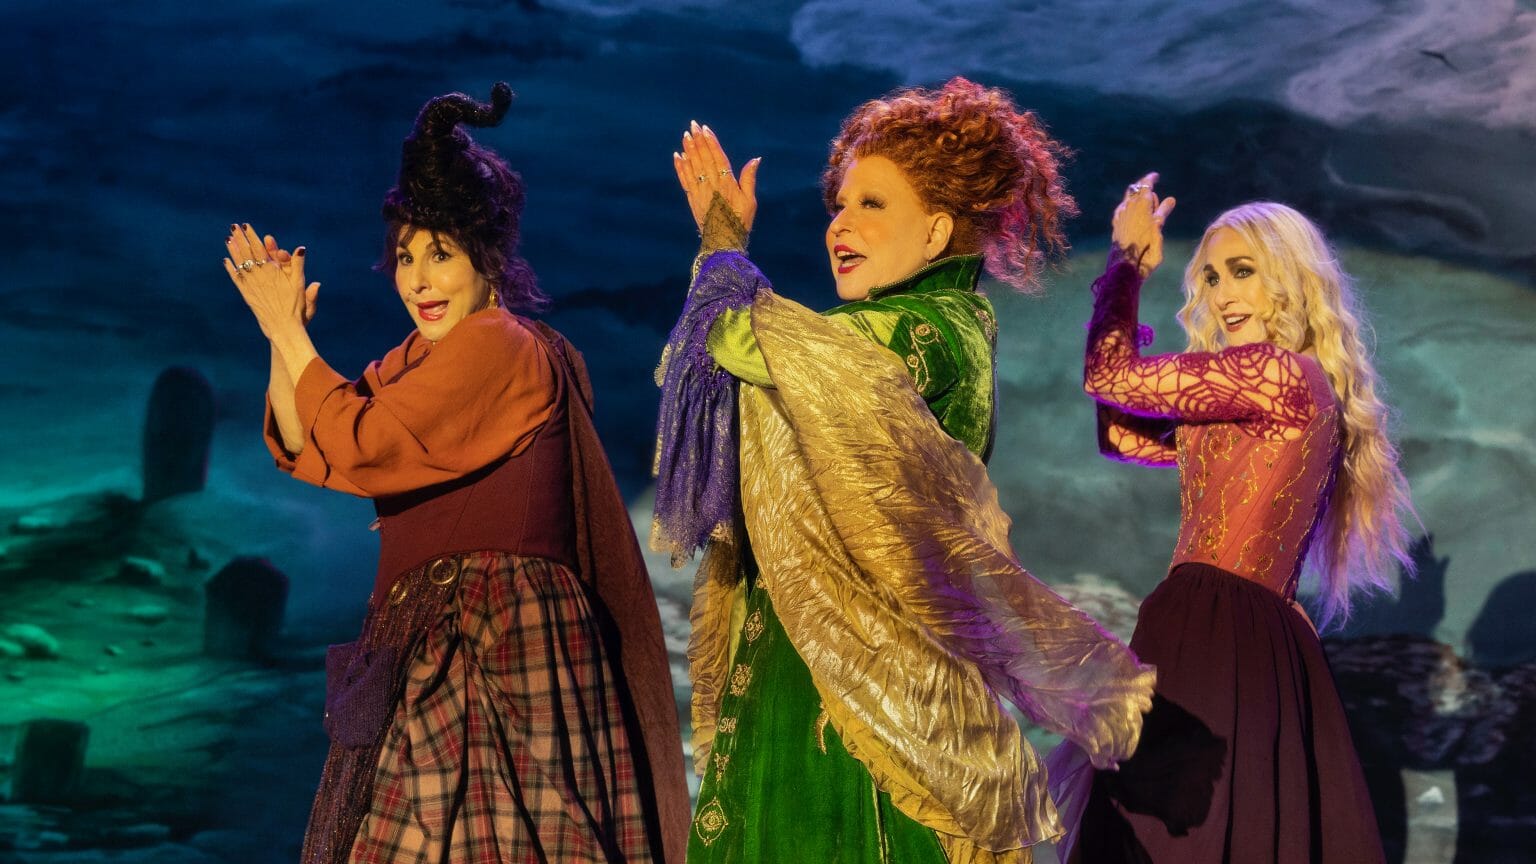 The three iconic Sanderson witch sisters played by Bette Midler, Sarah Jessica Parker, and Kathy Najimy perform a musical number of One Way or Another by Blondie on stage in HOCUS POCUS 2 streaming only on Disney+.